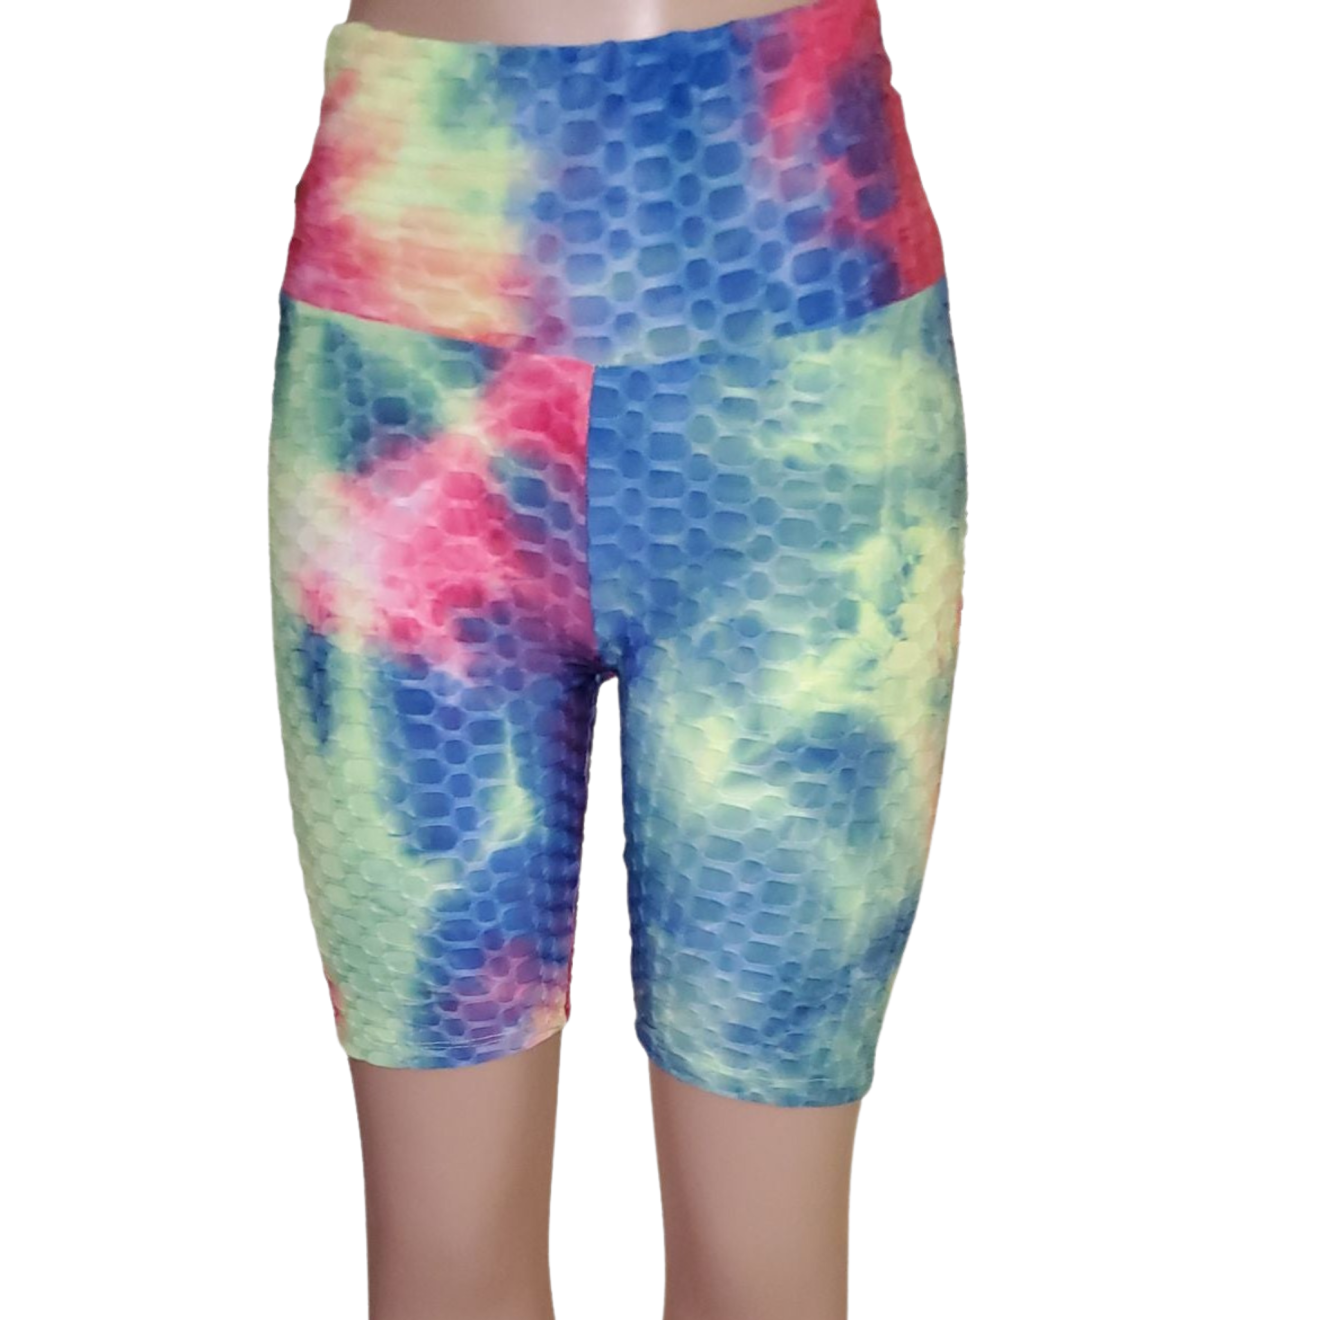 Vibrant Tie-Dye Honeycomb Knit Biker Shorts - A fashionable and comfortable pair of shorts with a tie-dye pattern and honeycomb knit texture.